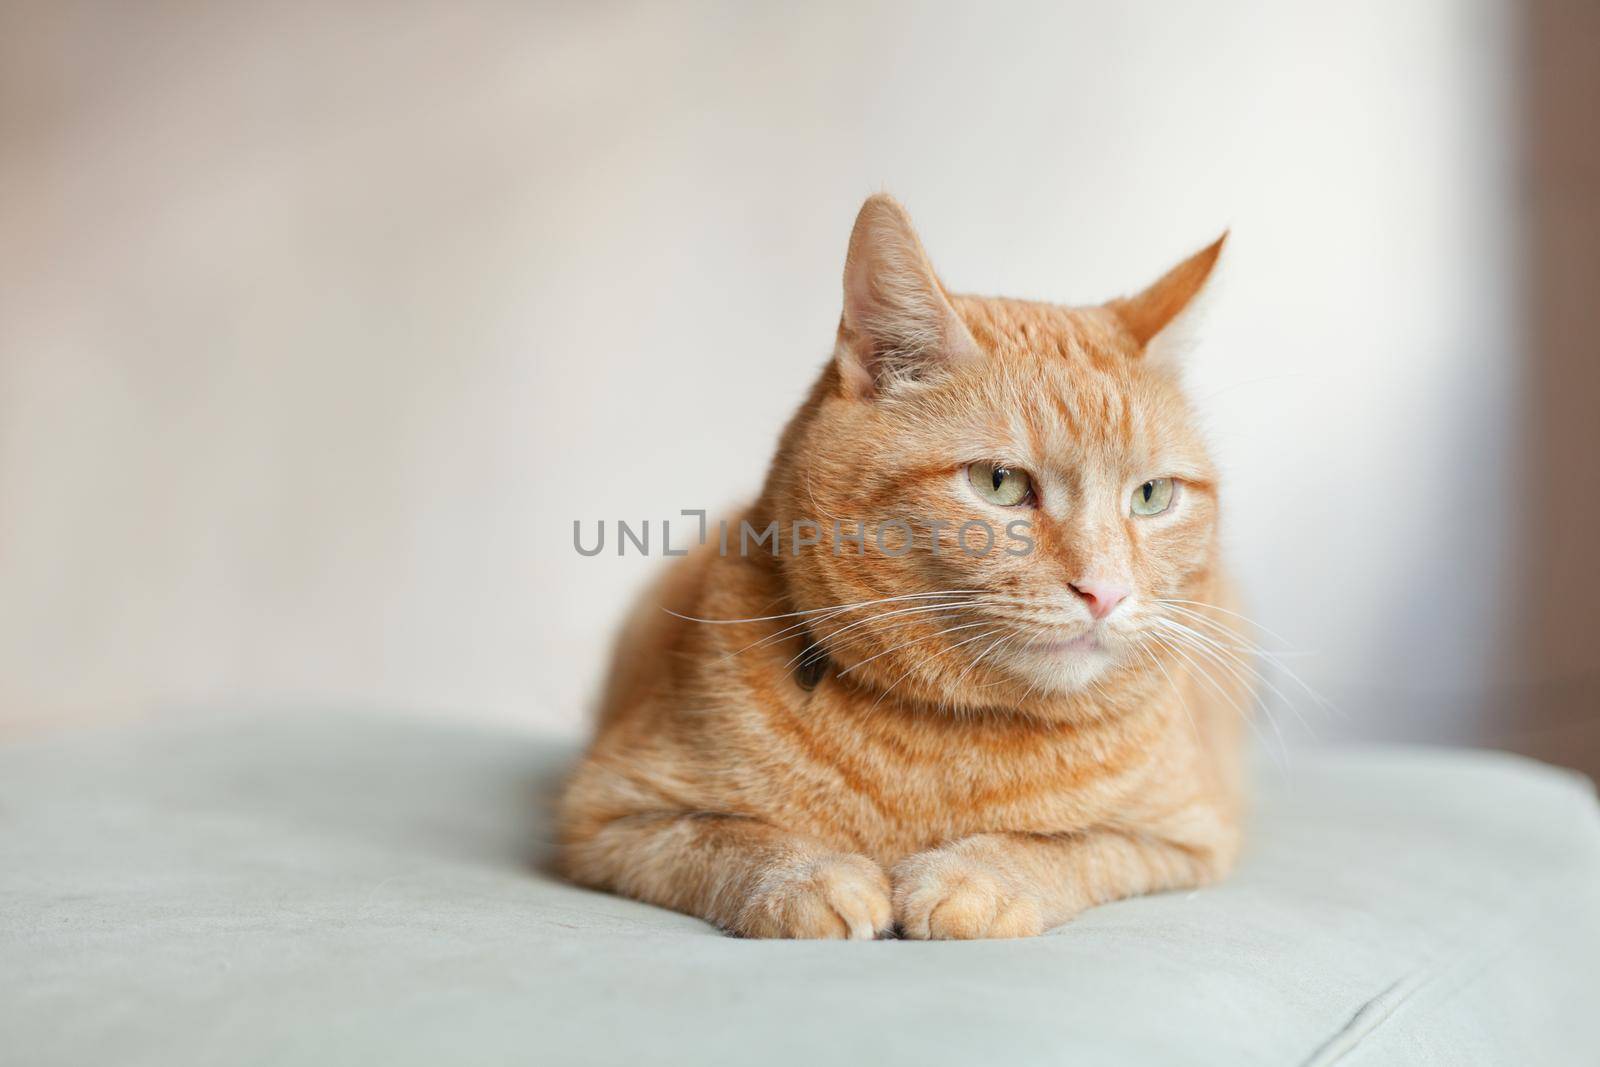 Lying tabby ginger cat. Looking ginger cat, sitting on the chair. Pleased orange ginger cat sitting on the chair and having a rest at home. copy space. Funny red cat in cozy home atmosphere.